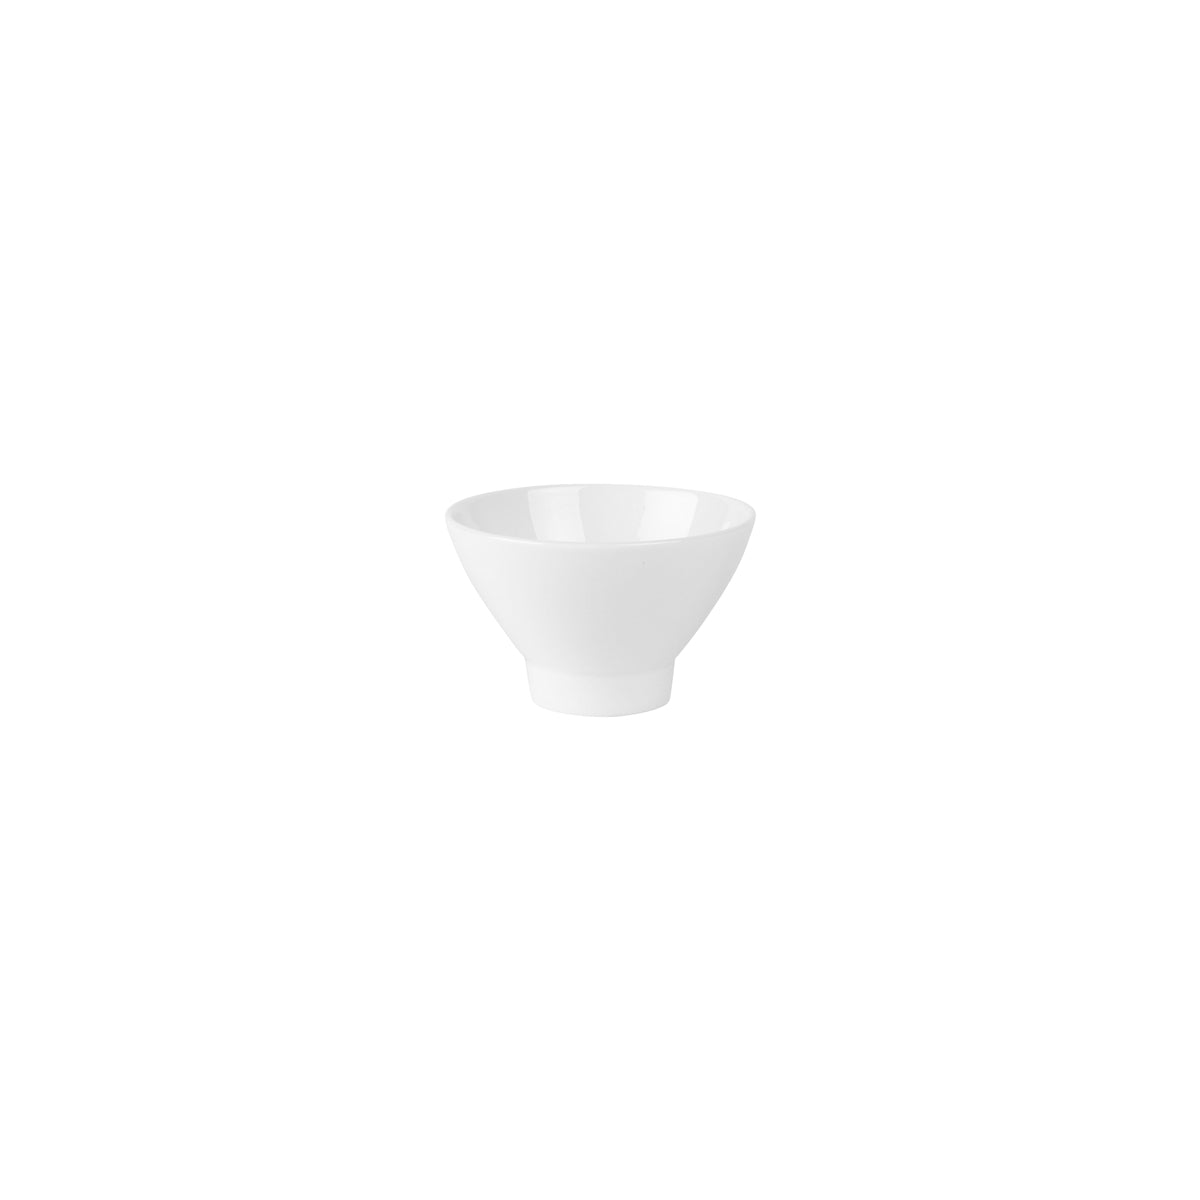 VB16-3272-3932 Villeroy And Boch Villeroy And Boch Stella Hotel White Footed Bowl 80mm / 70ml Tomkin Australia Hospitality Supplies